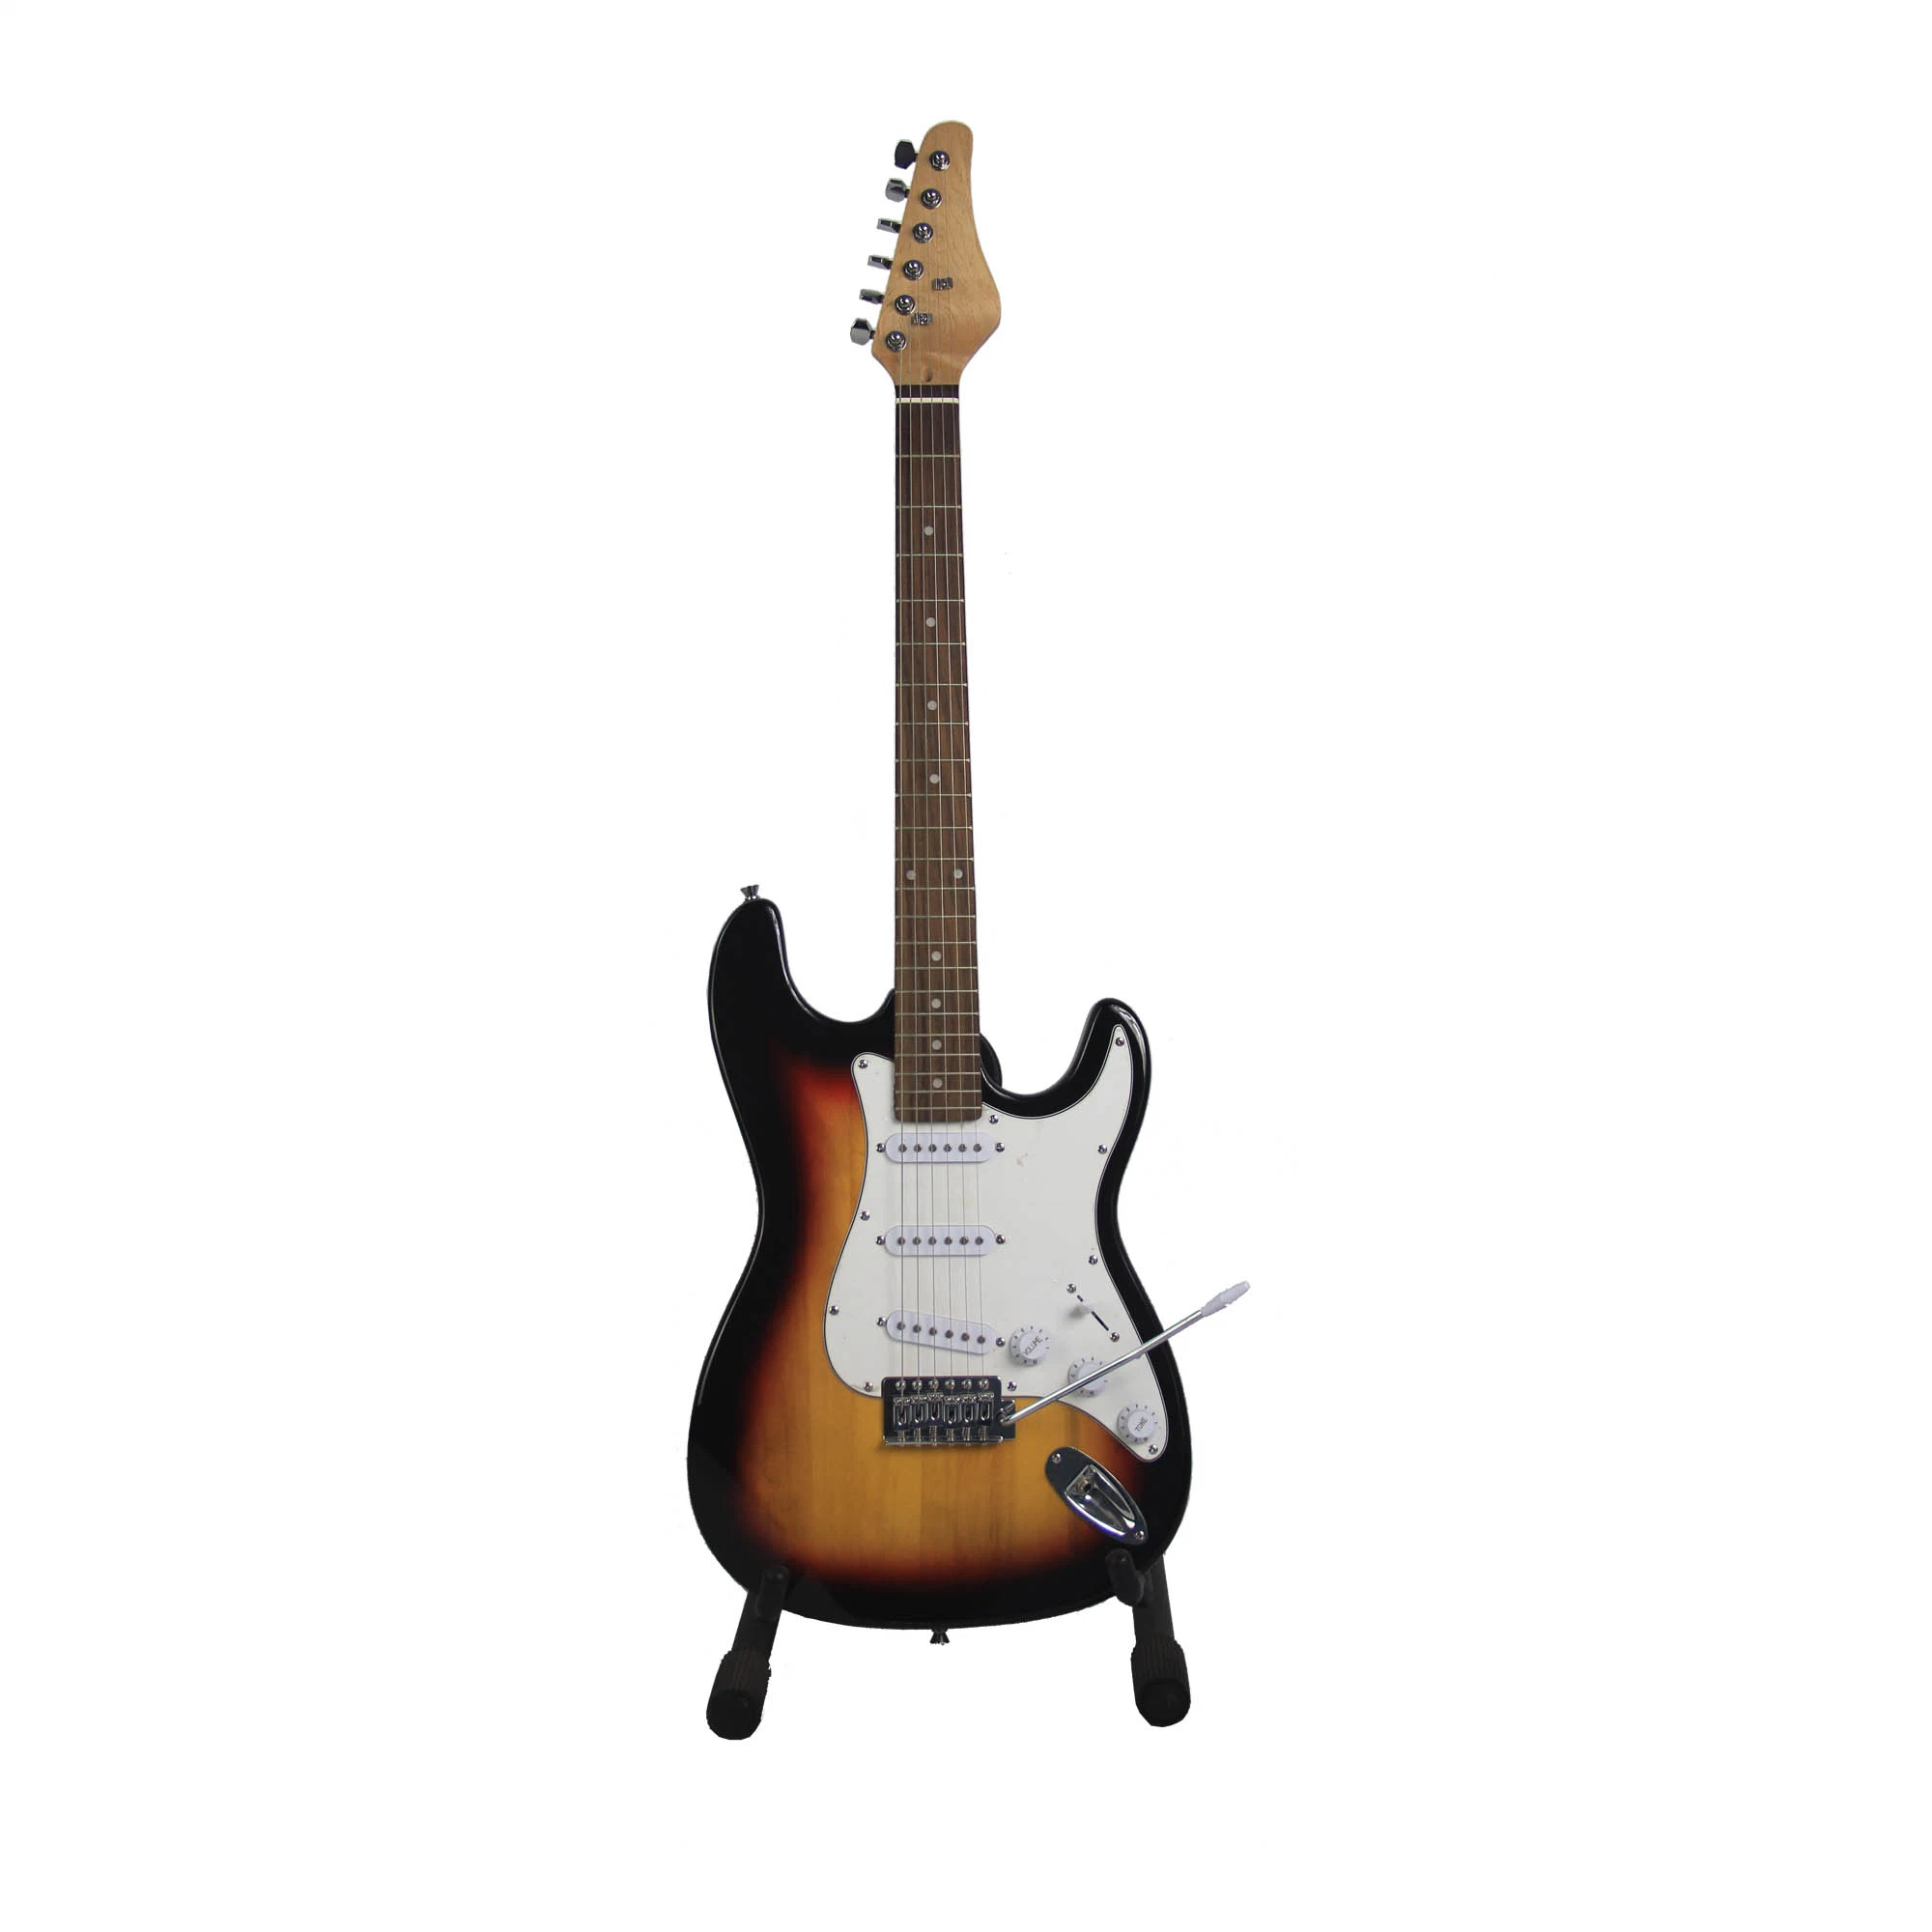 St Style Electric Guitar (ST-100)